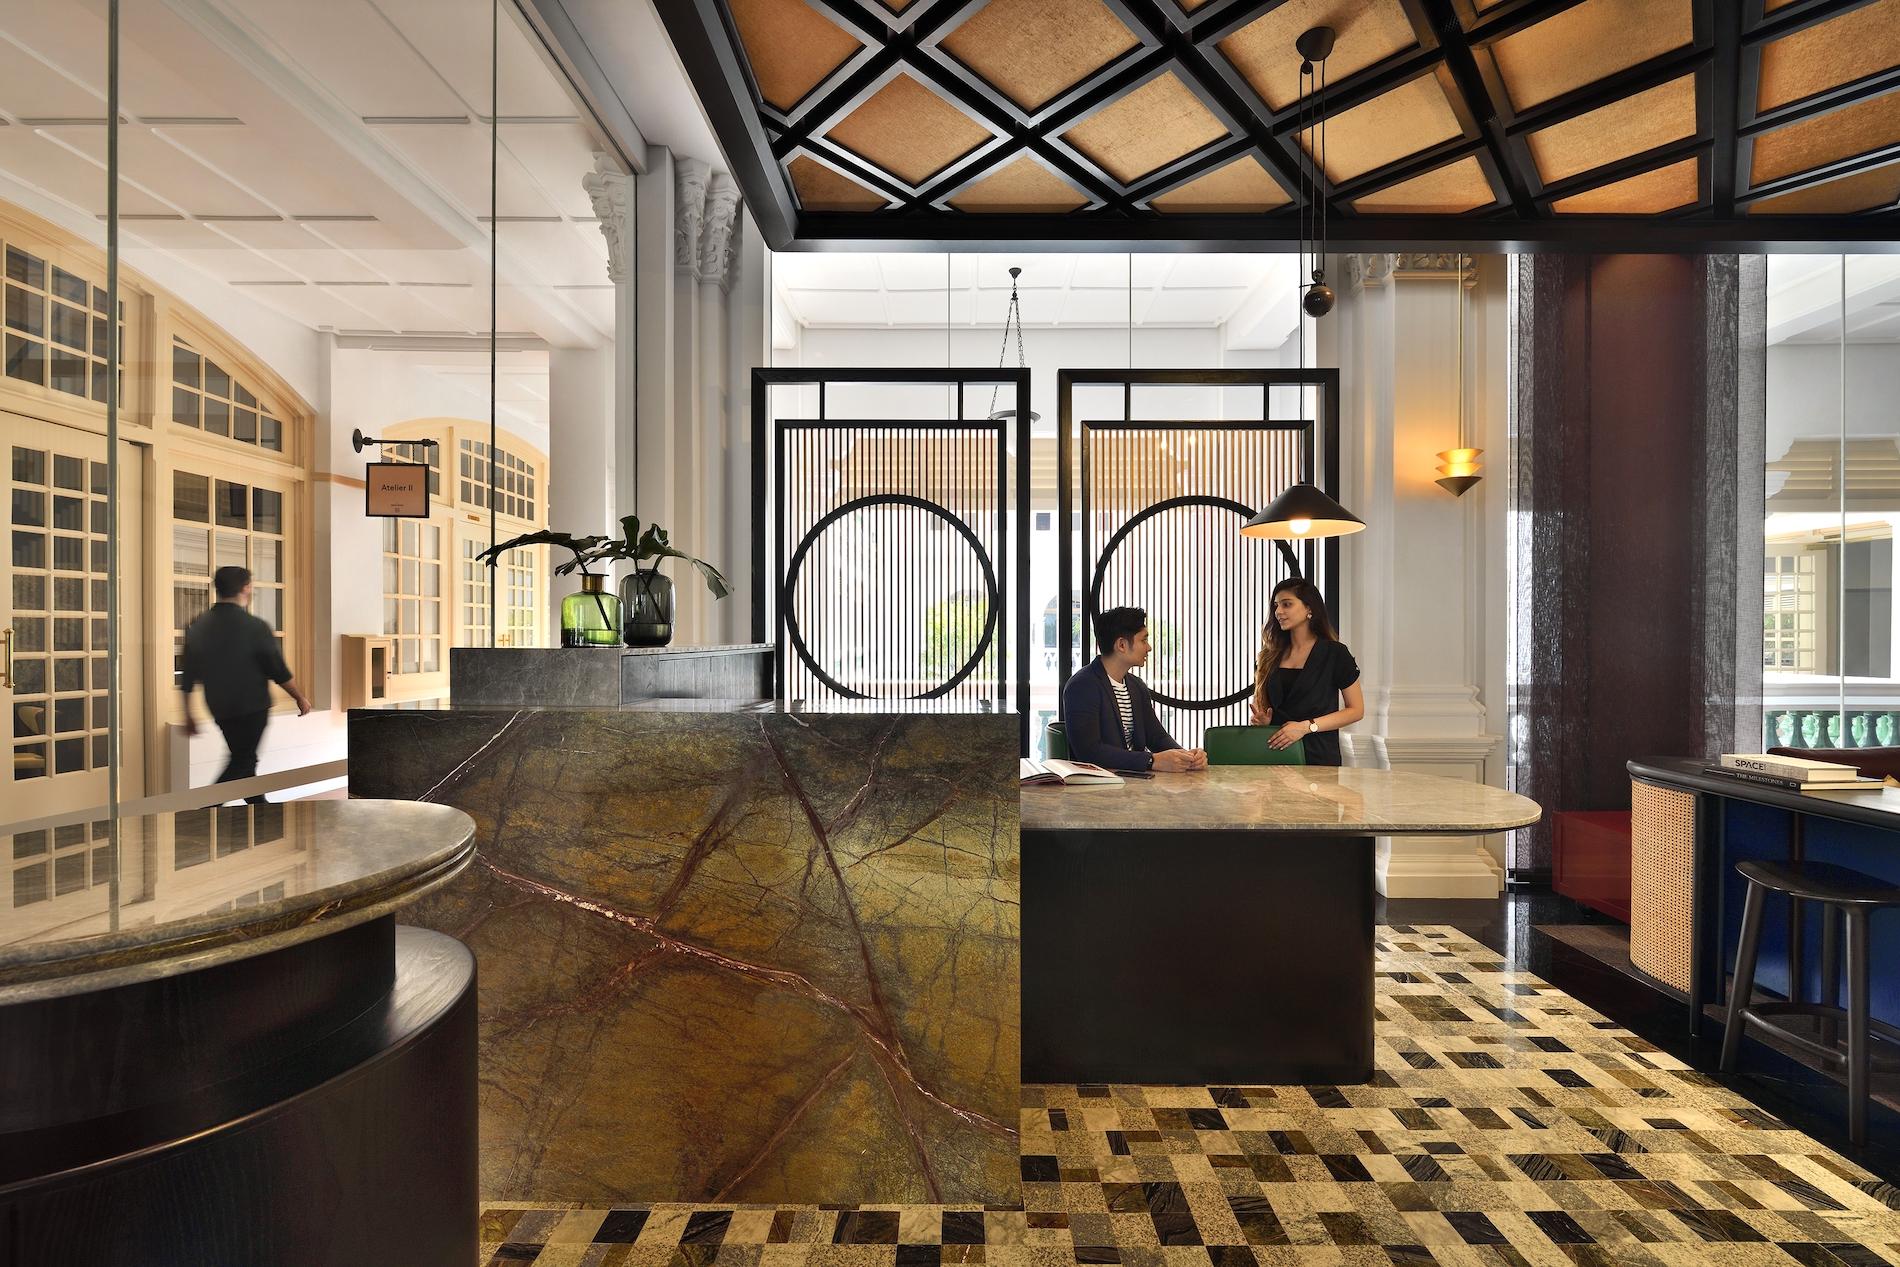 This New Workspace Is Built Inside a Glamorous Heritage Hotel